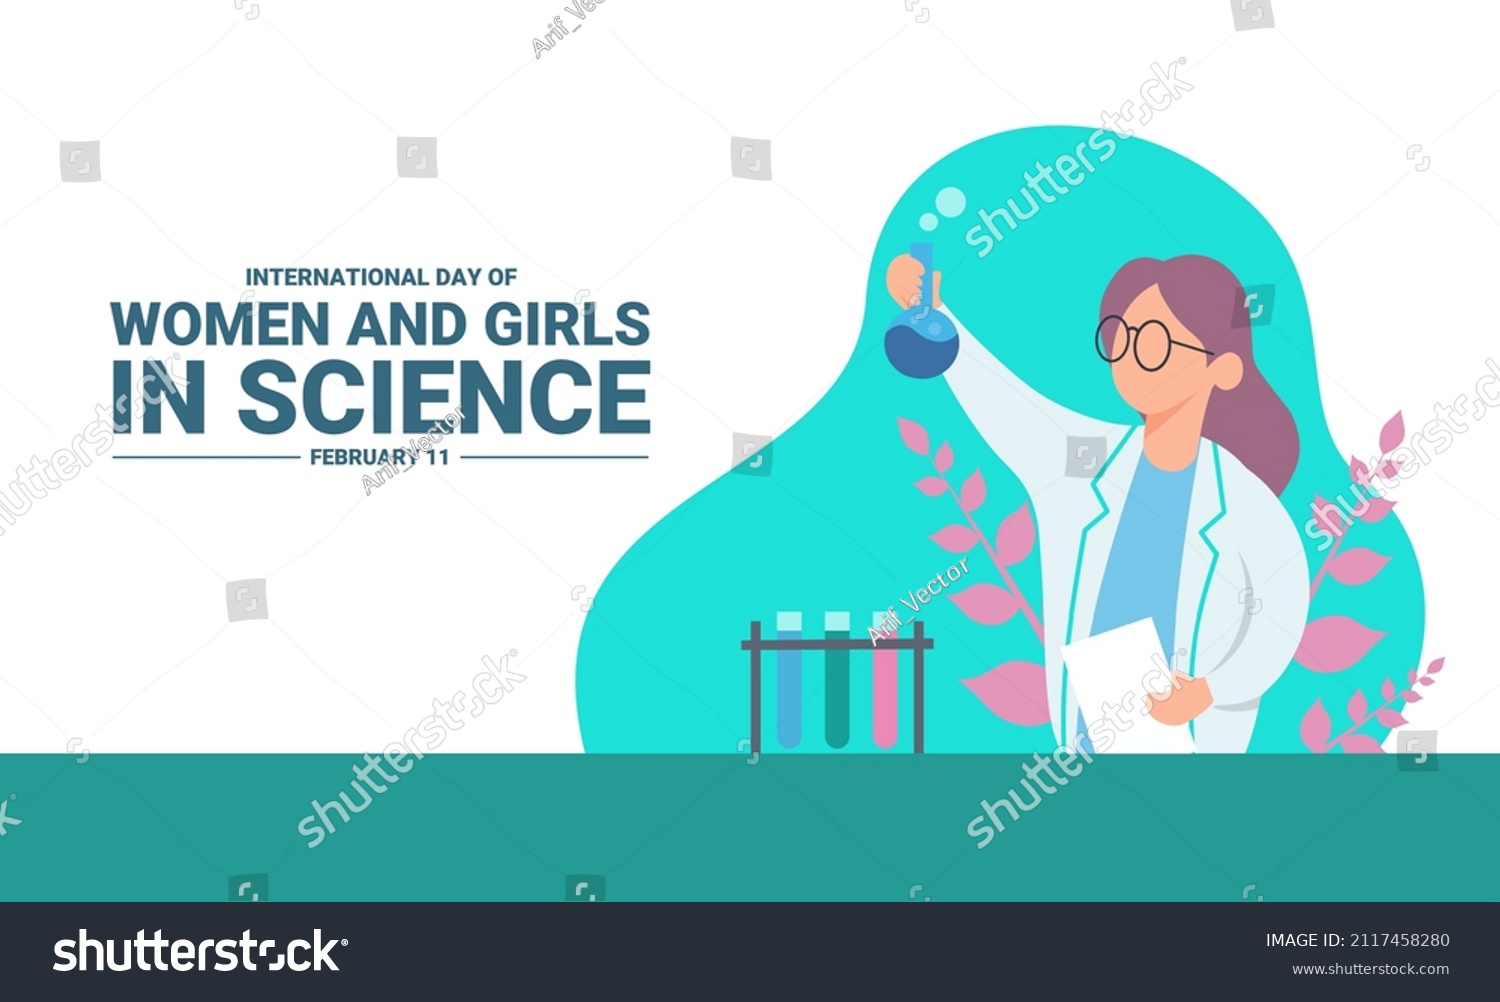 International Day of Women and Girls in Science. Science icon set. Illustration of young scientist woman. vector illustration. #2117458280